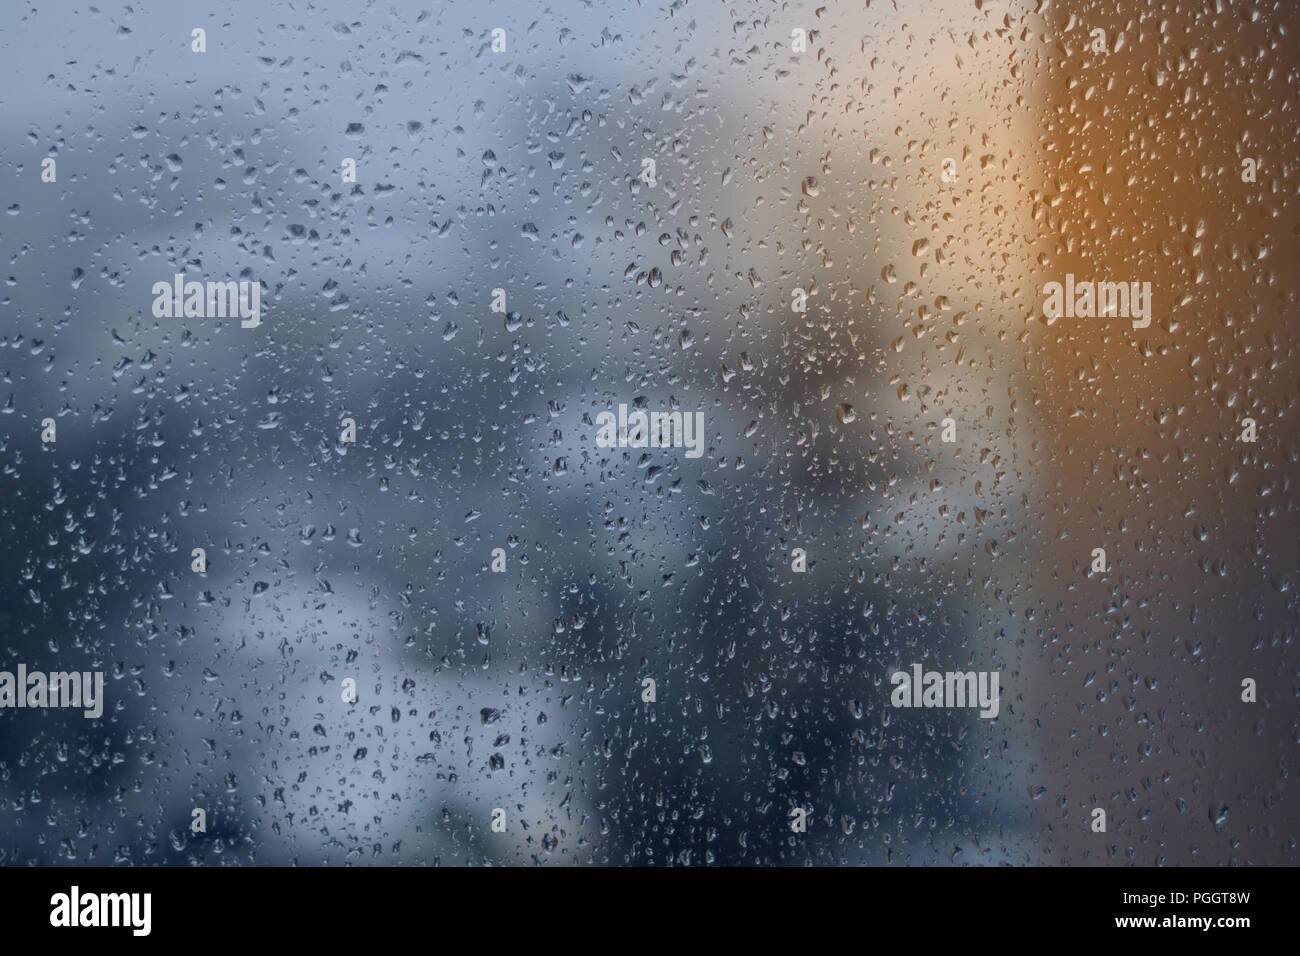 Abstract blue and yellow background, texture of rain drops on glass. Raindrops on window, rainy weather. Stock Photo